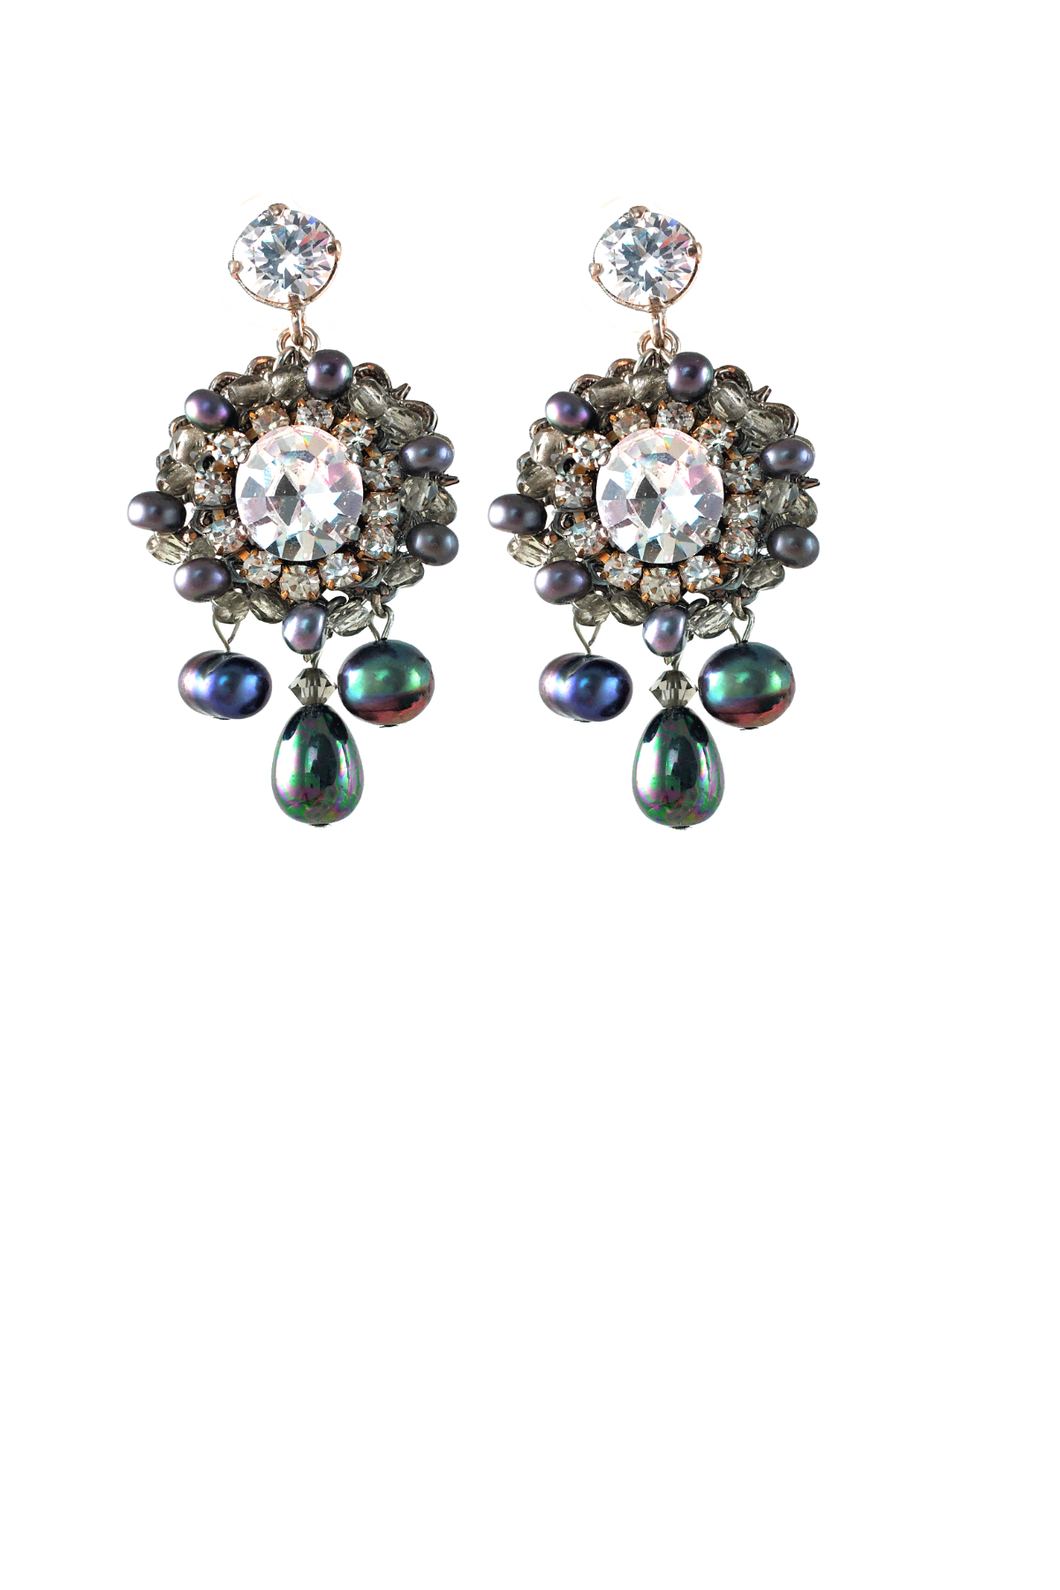 Baroque  Freshwater pearls and Swarovski Crystals Broadway Earrings